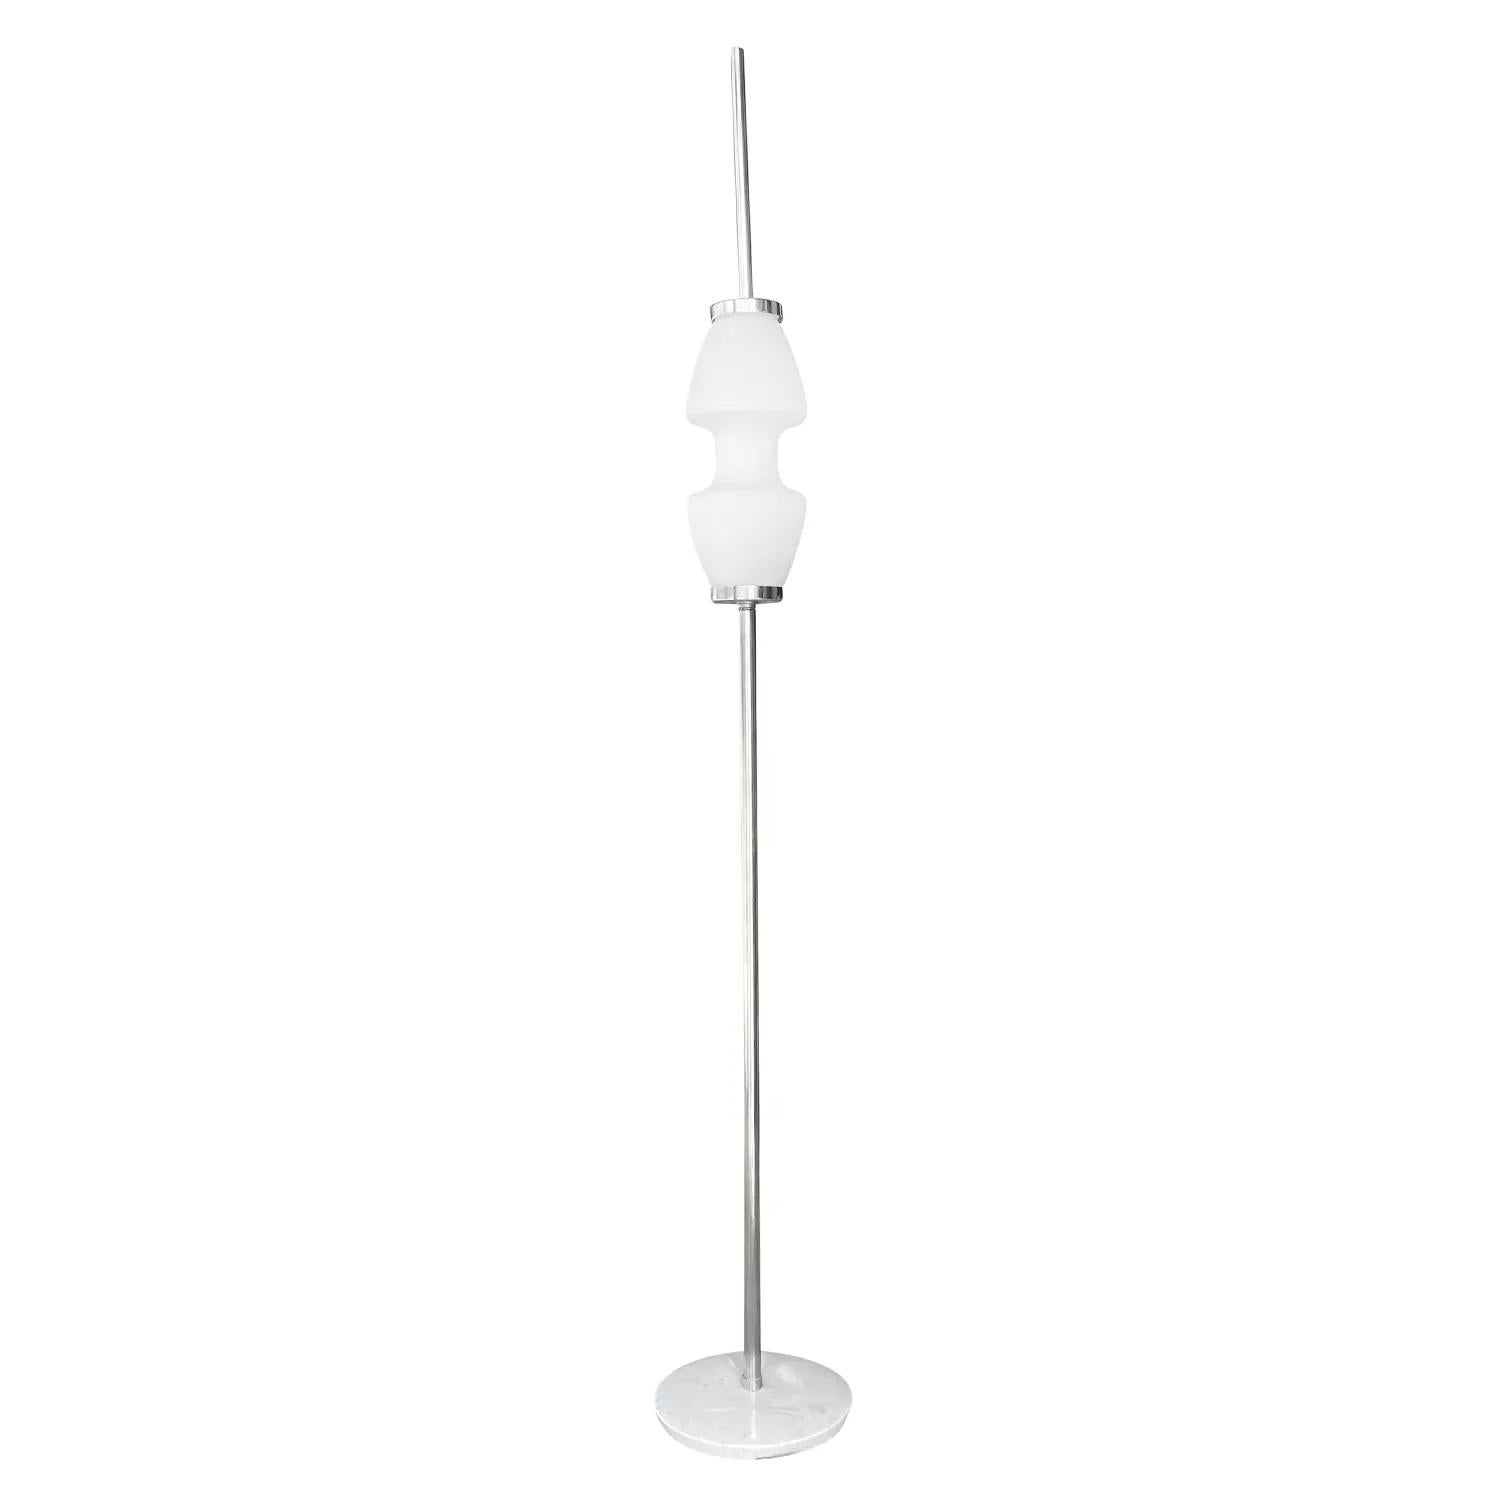 20th Century Italian Mid-Century Modern Marble, Frosted Opaline Glass Floor Lamp In Good Condition For Sale In West Palm Beach, FL